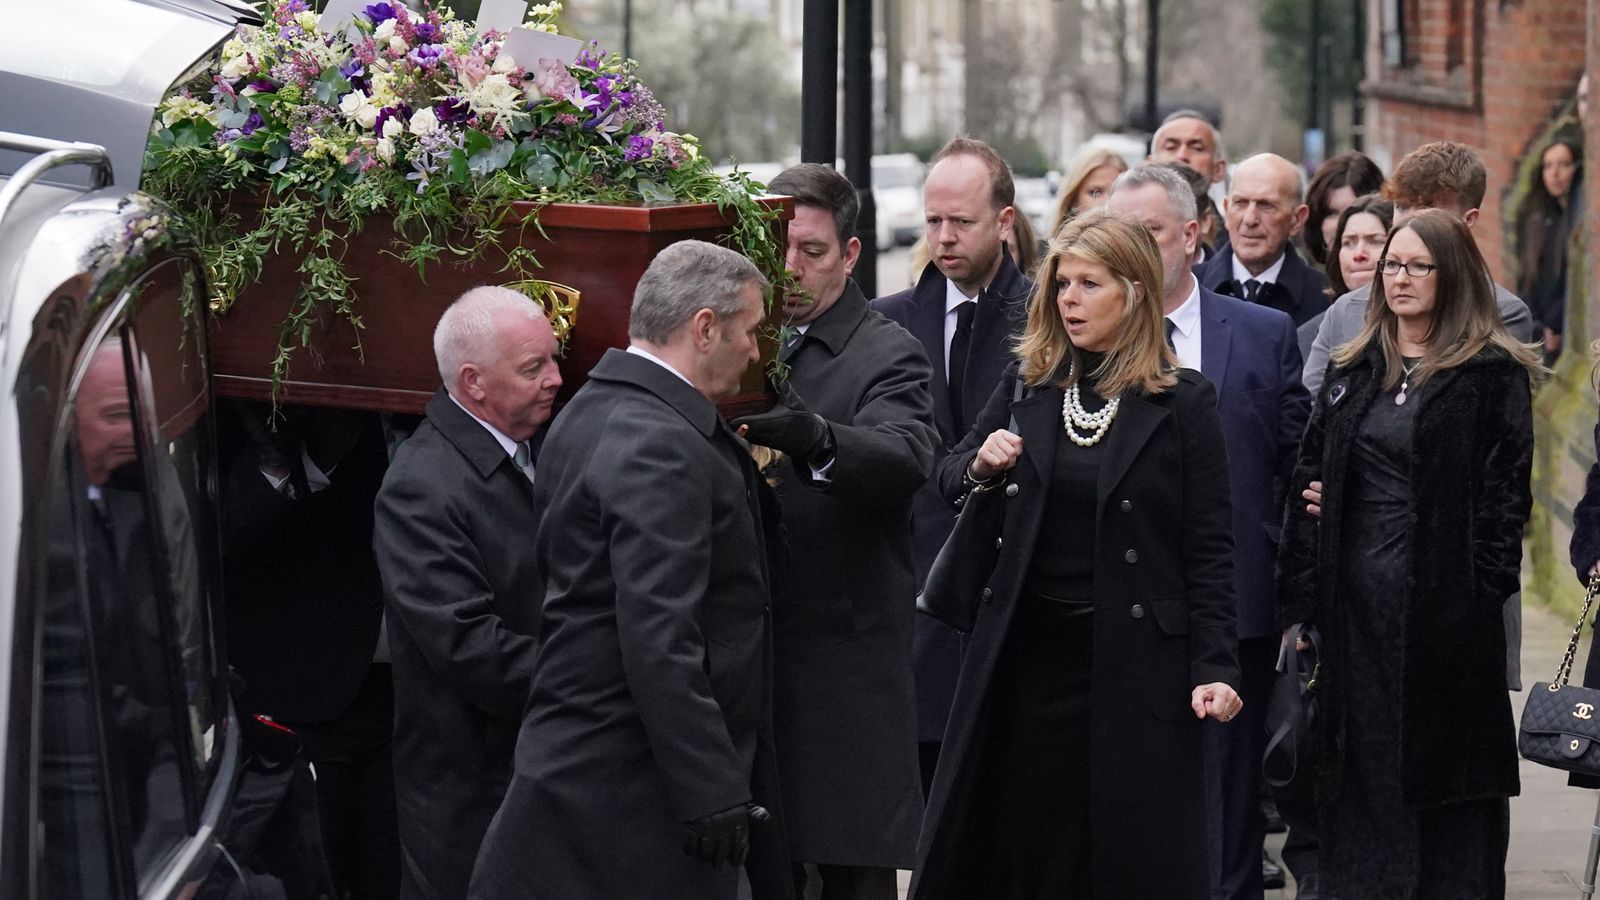 Derek Draper funeral: Kate Garraway leads procession for husband with Tony Blair and Elton John in attendance